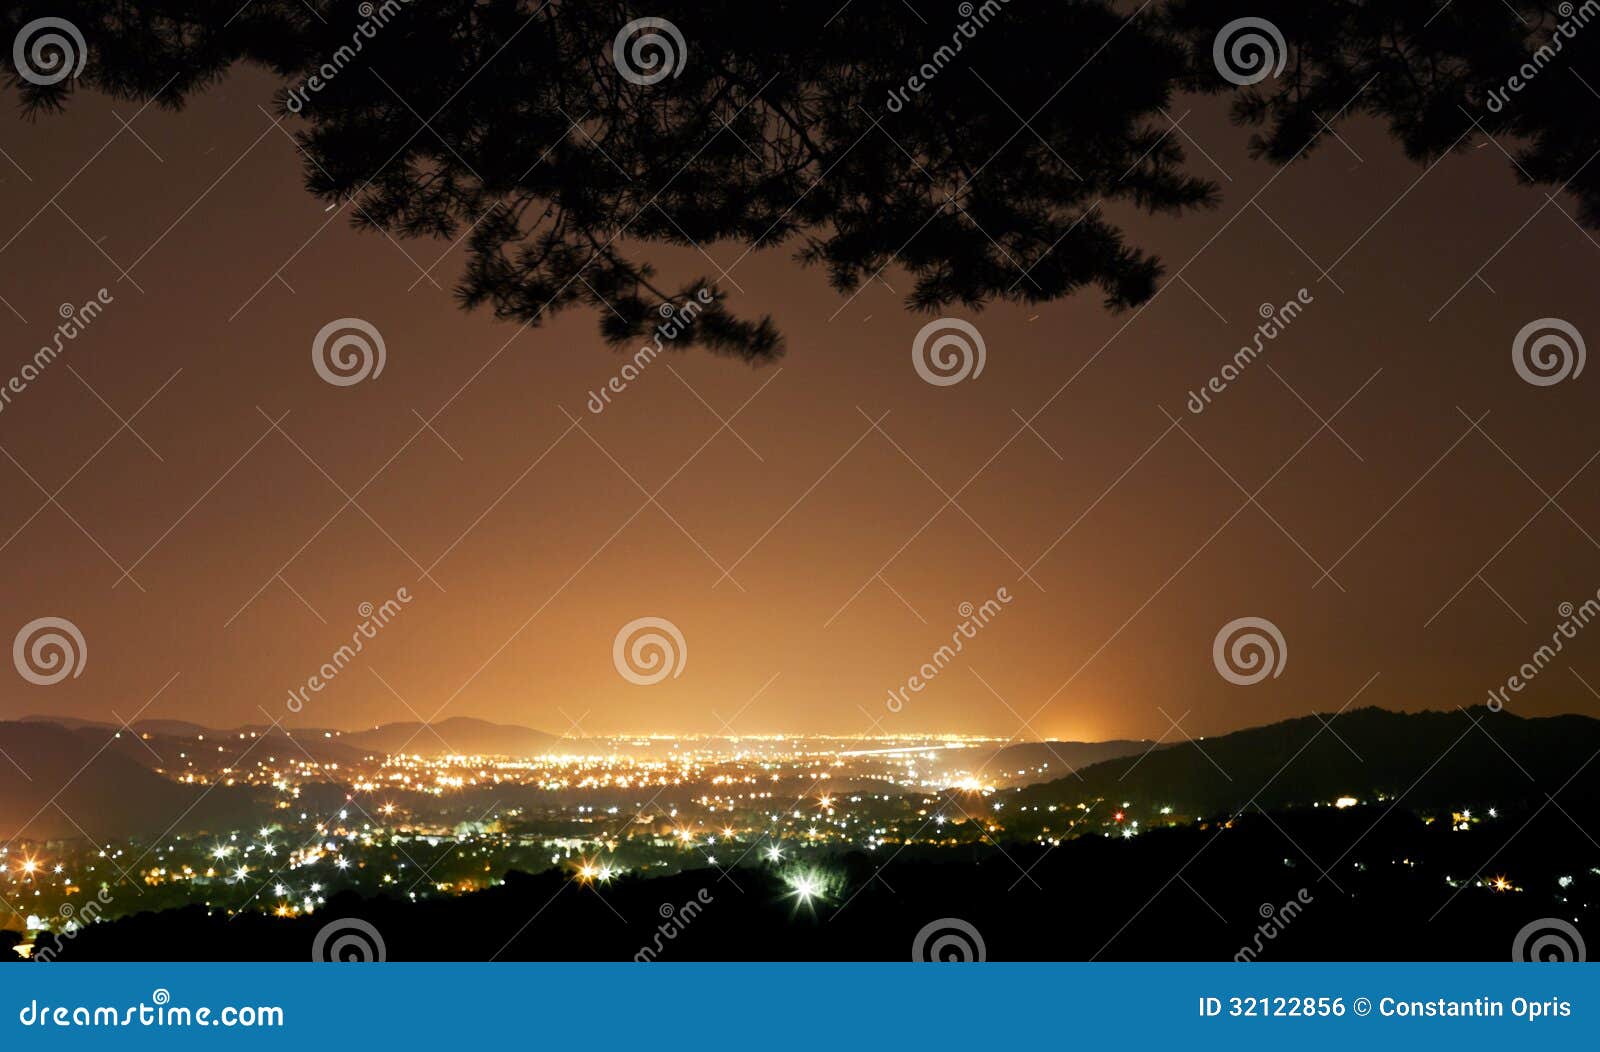 night city seen from forest